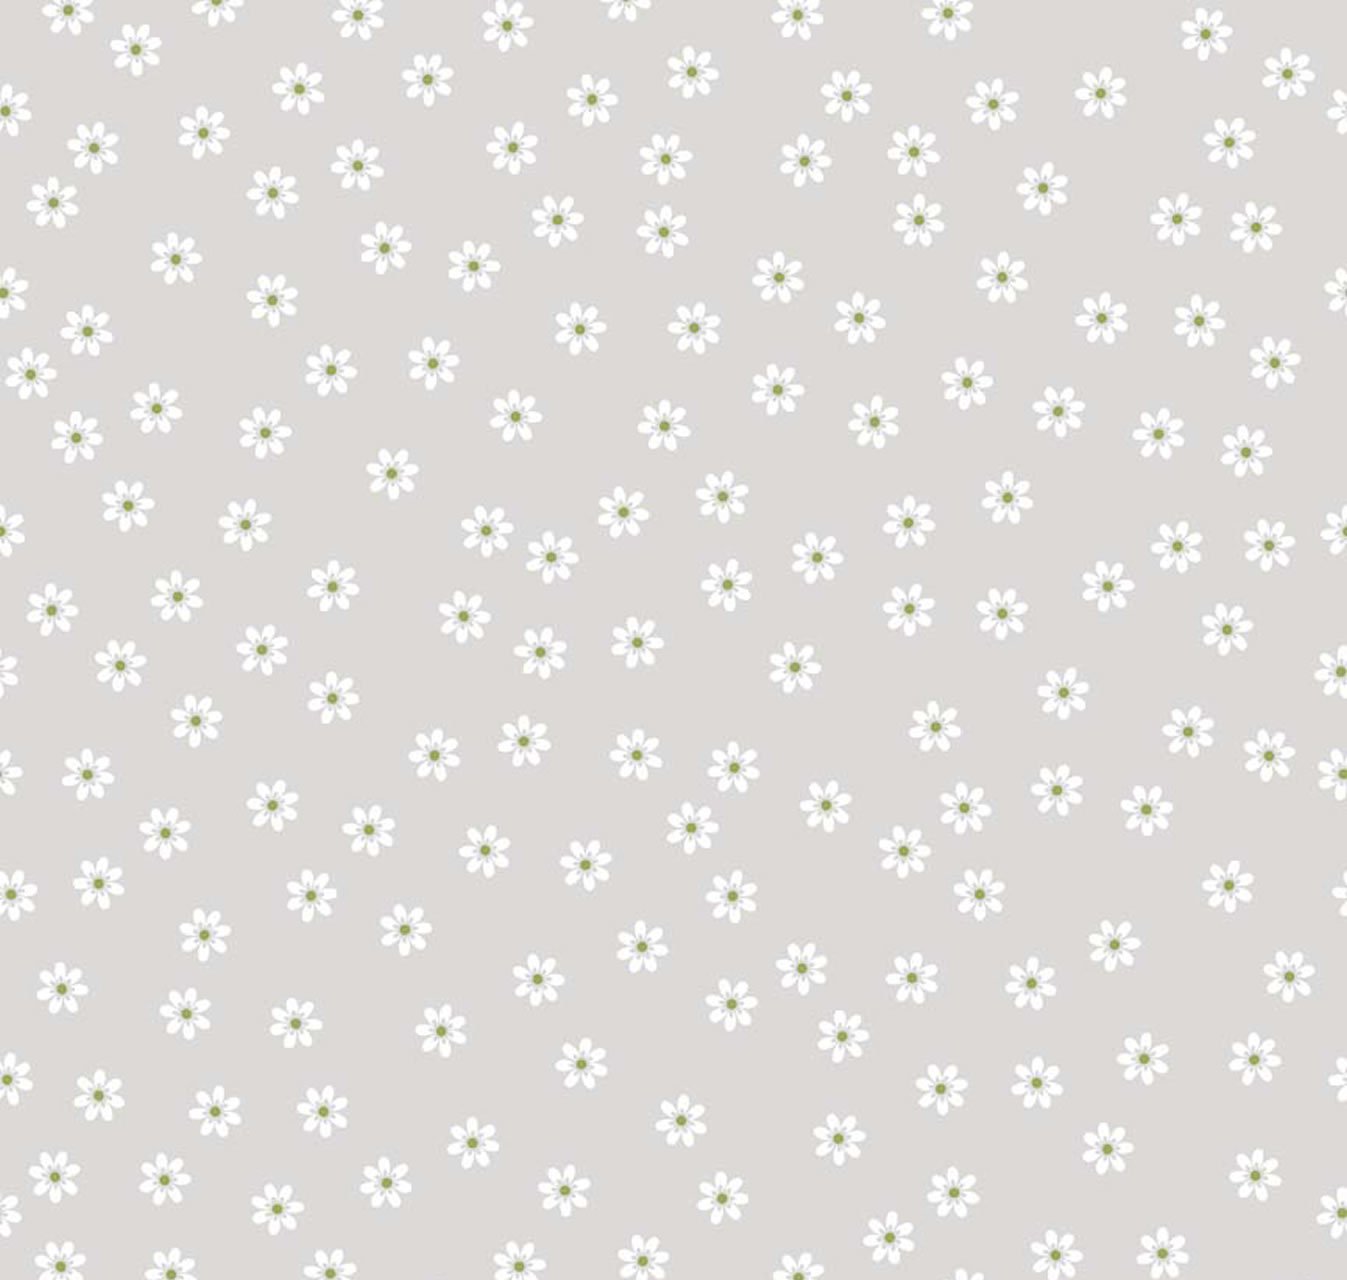 Polka Dots - Daisy - Stitches Collection by Lori Holt of Bee in My Bonnet - C3053 Gray FQ - Gray Green White - Riley Blake